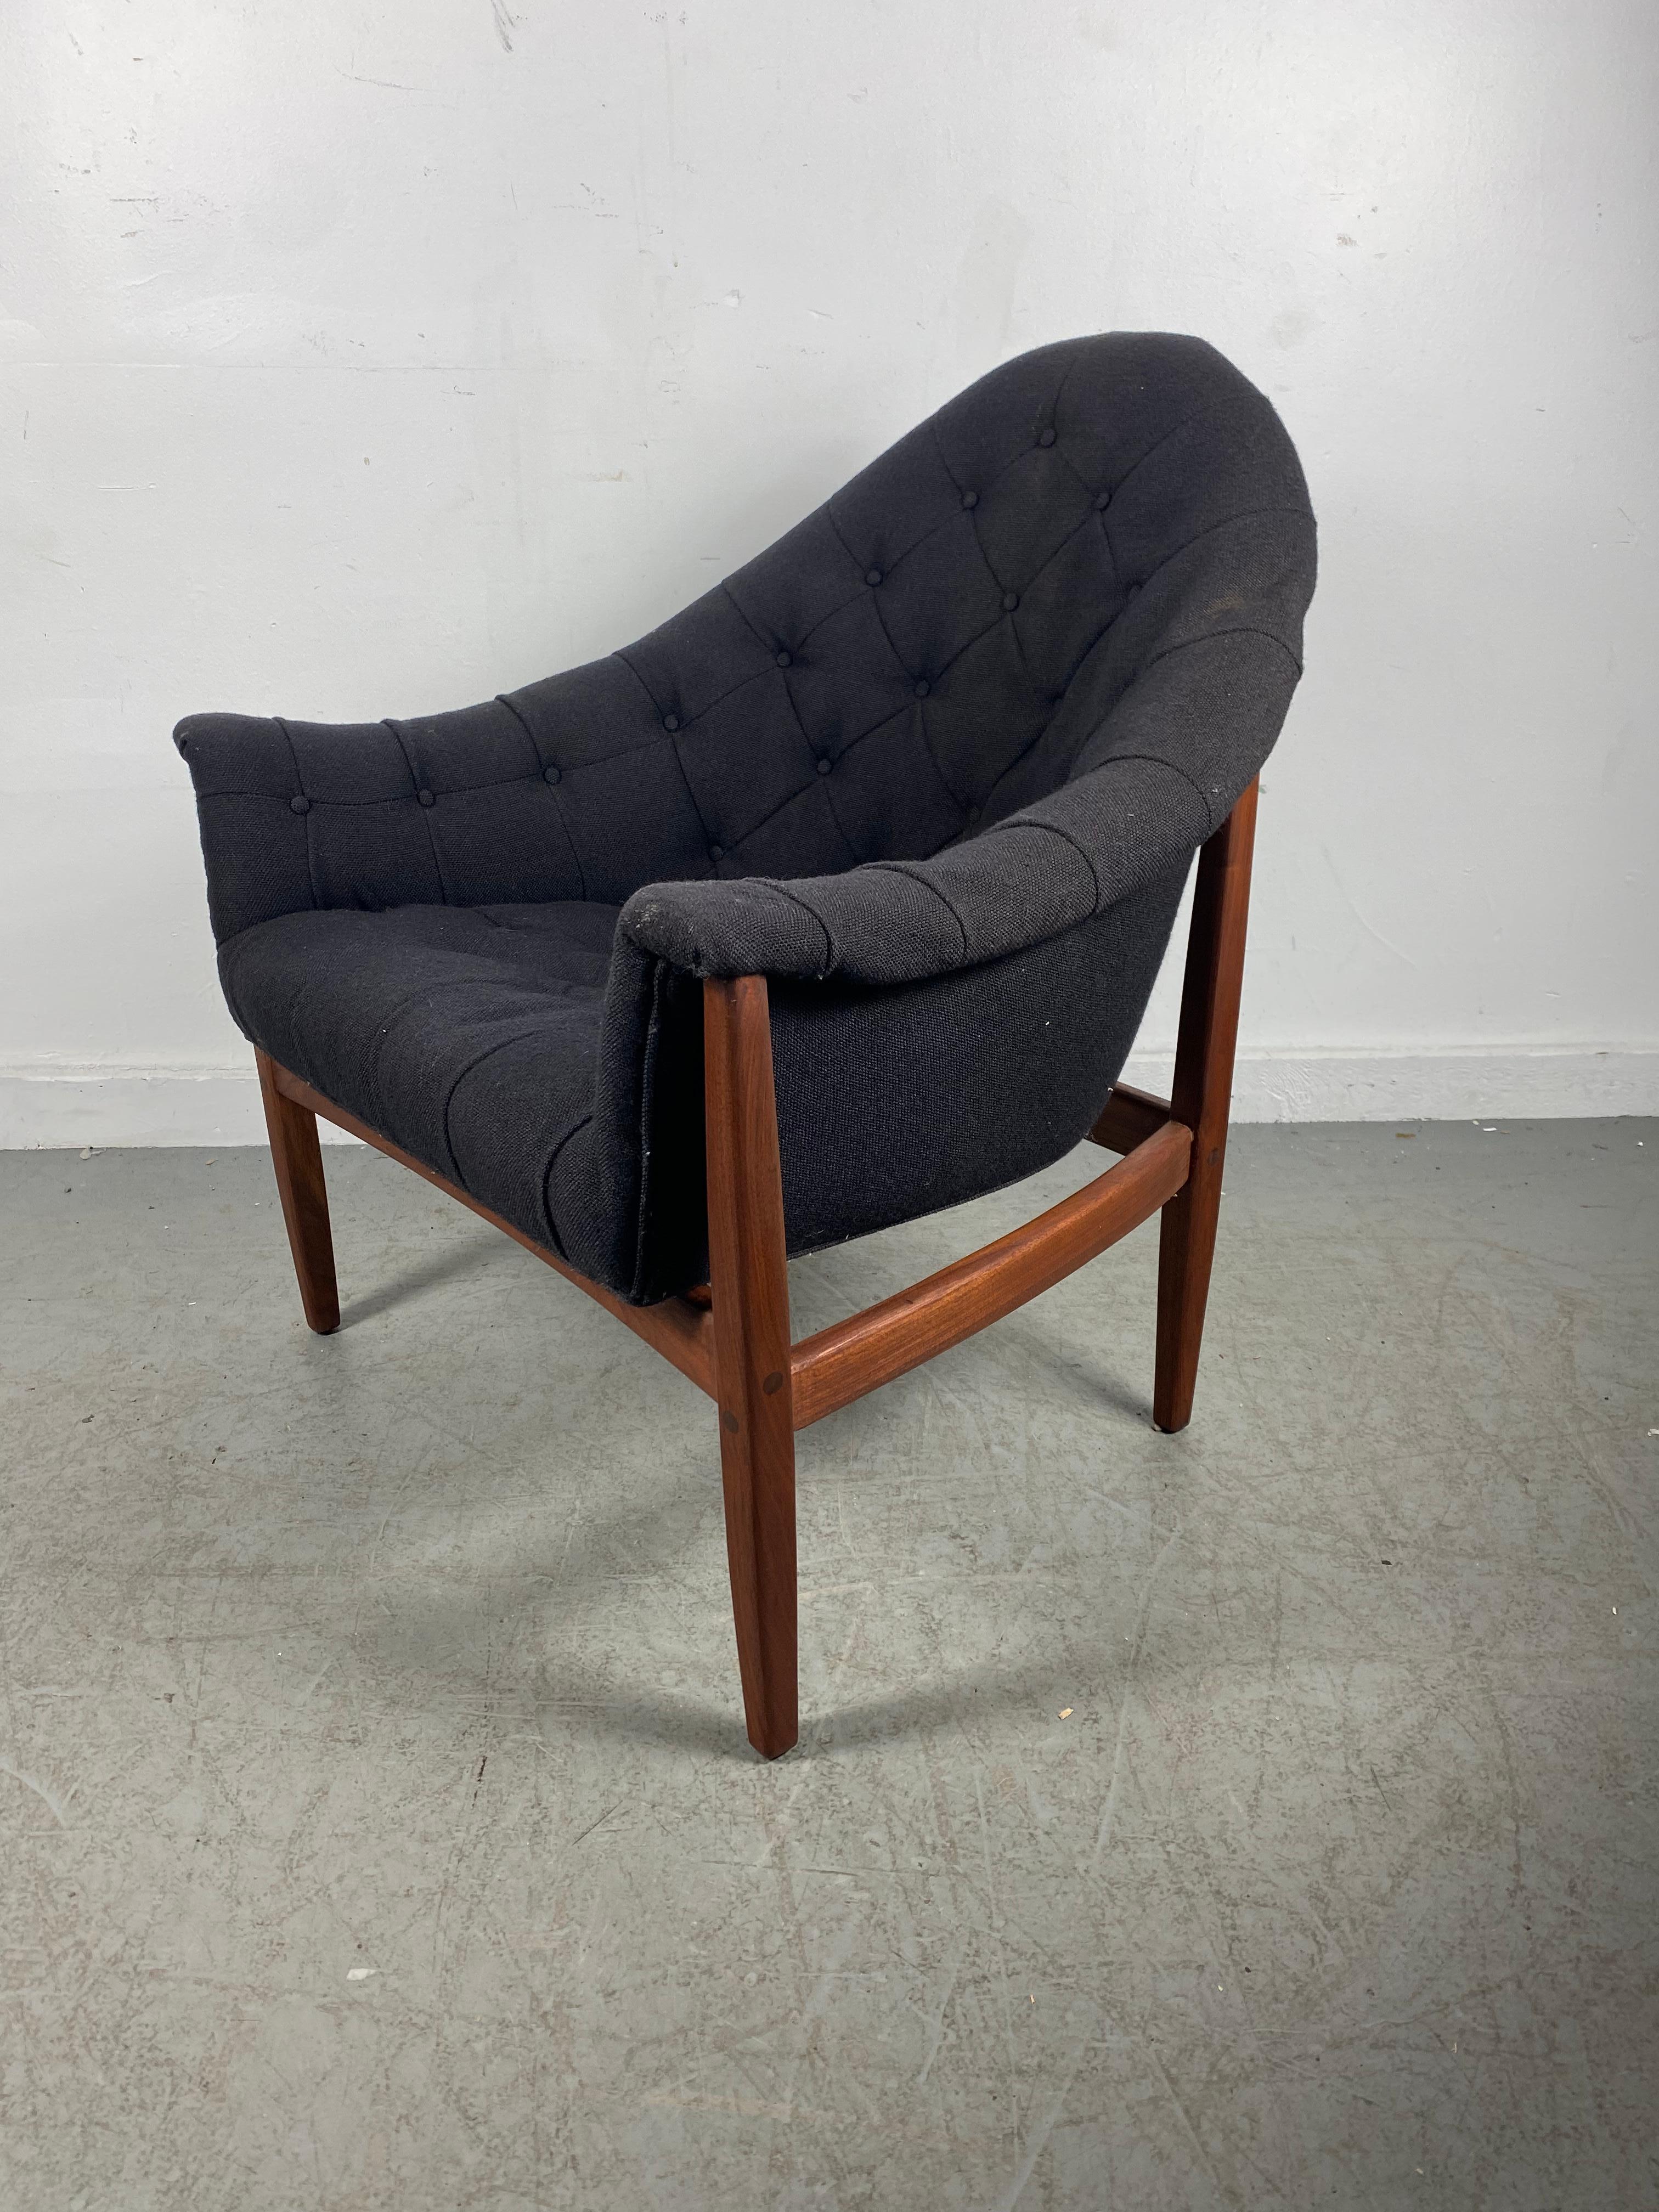 Ultra coveted tufted lounge chair with exterior mounted rosewood frame by Milo Baughman for Thayer Coggin, circa 1965.Retains original wool upholstery. Extremely comfortable. Classic styling, Hand delivery avail to New York City or anywhere en route